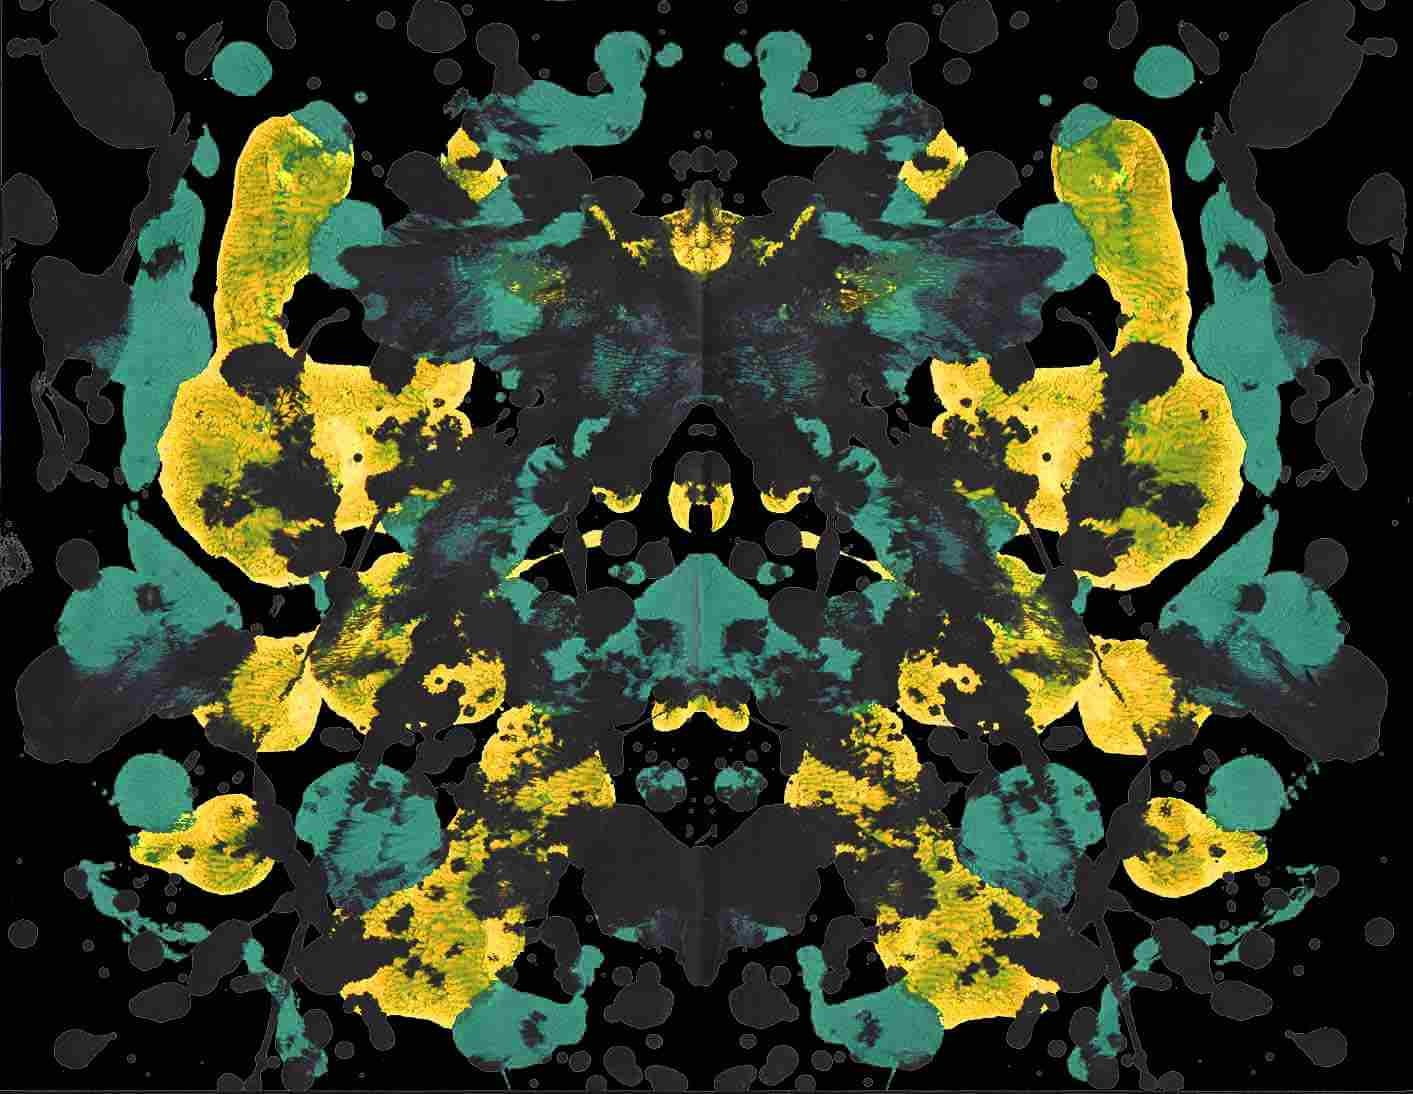 yellow and teal abstract painting, Rorschach test, ink, paint splatter